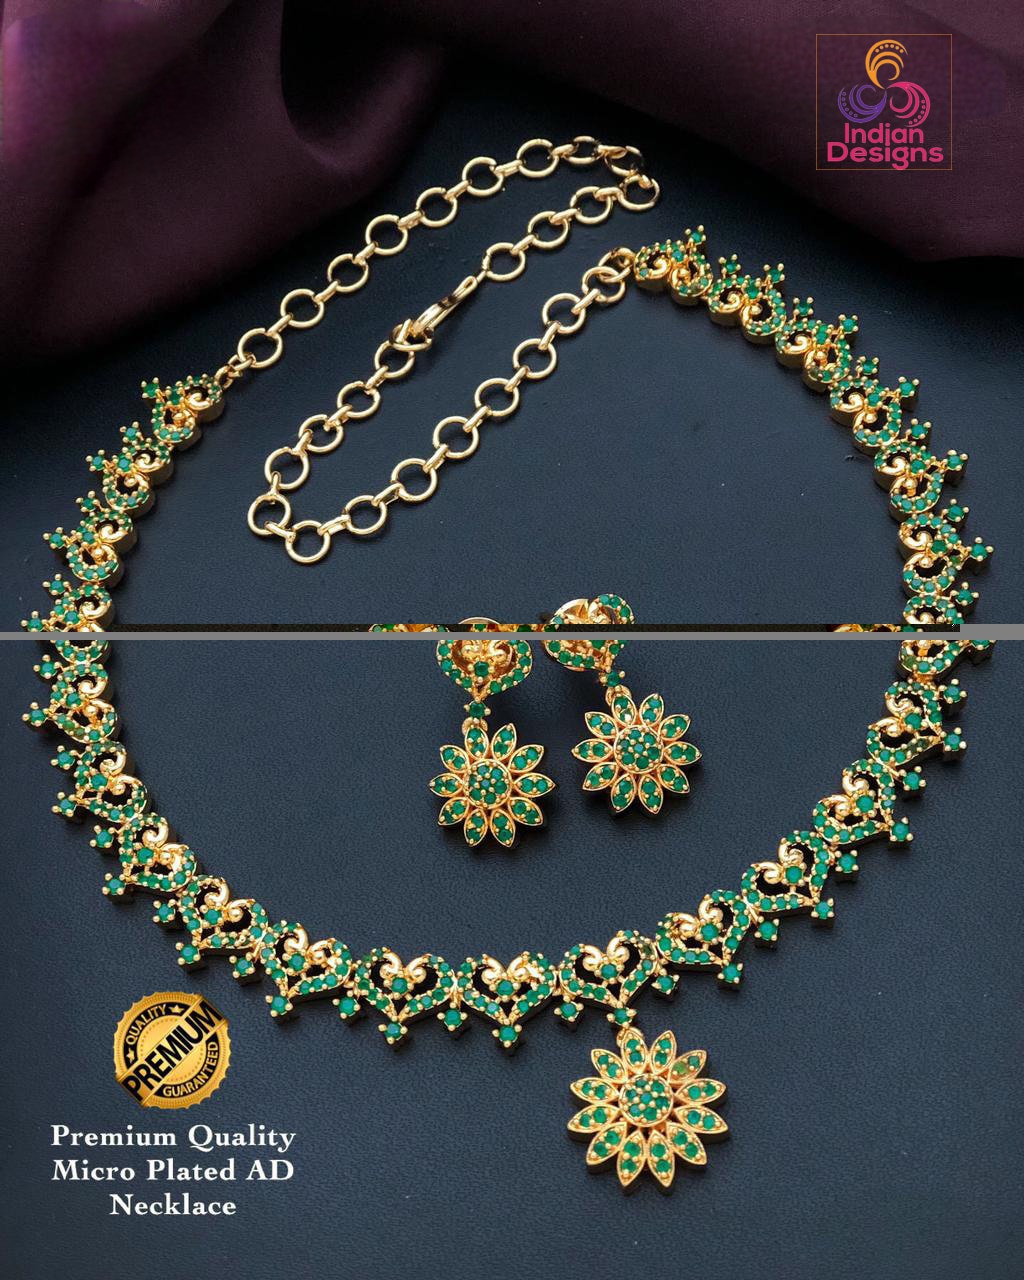 American Diamond Necklace-22k Gold polish | Emerald Ruby CZ Diamond choker | Indian jewelry sets | Ruby and Emerald necklace Floral designs